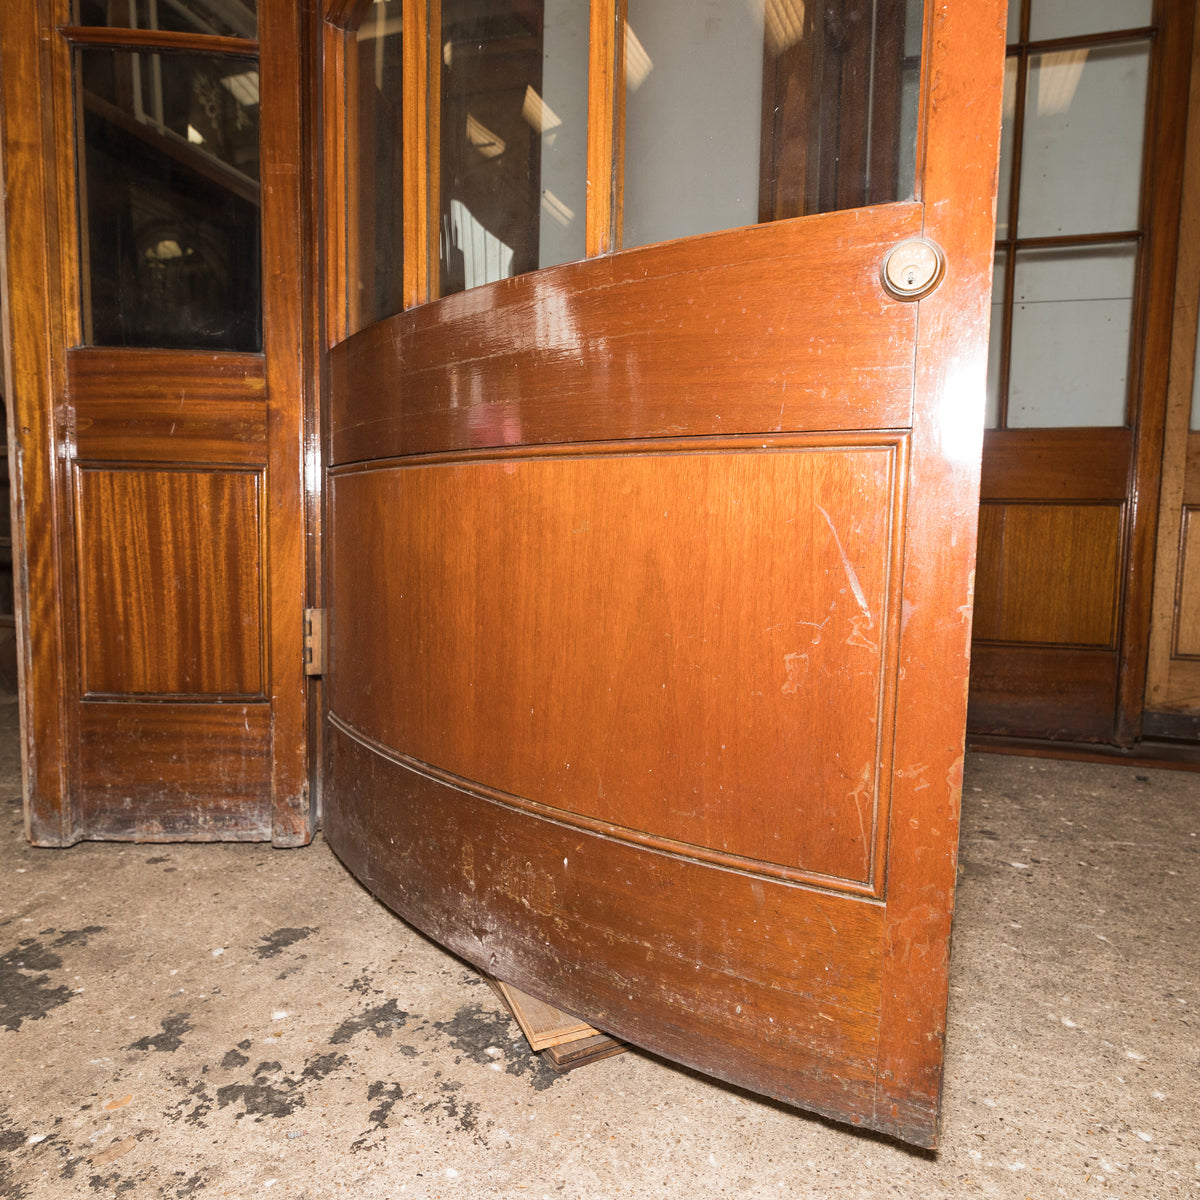 Antique Art Deco Grand Modular Glazed Entrance with Curved Wings | The Architectural Forum